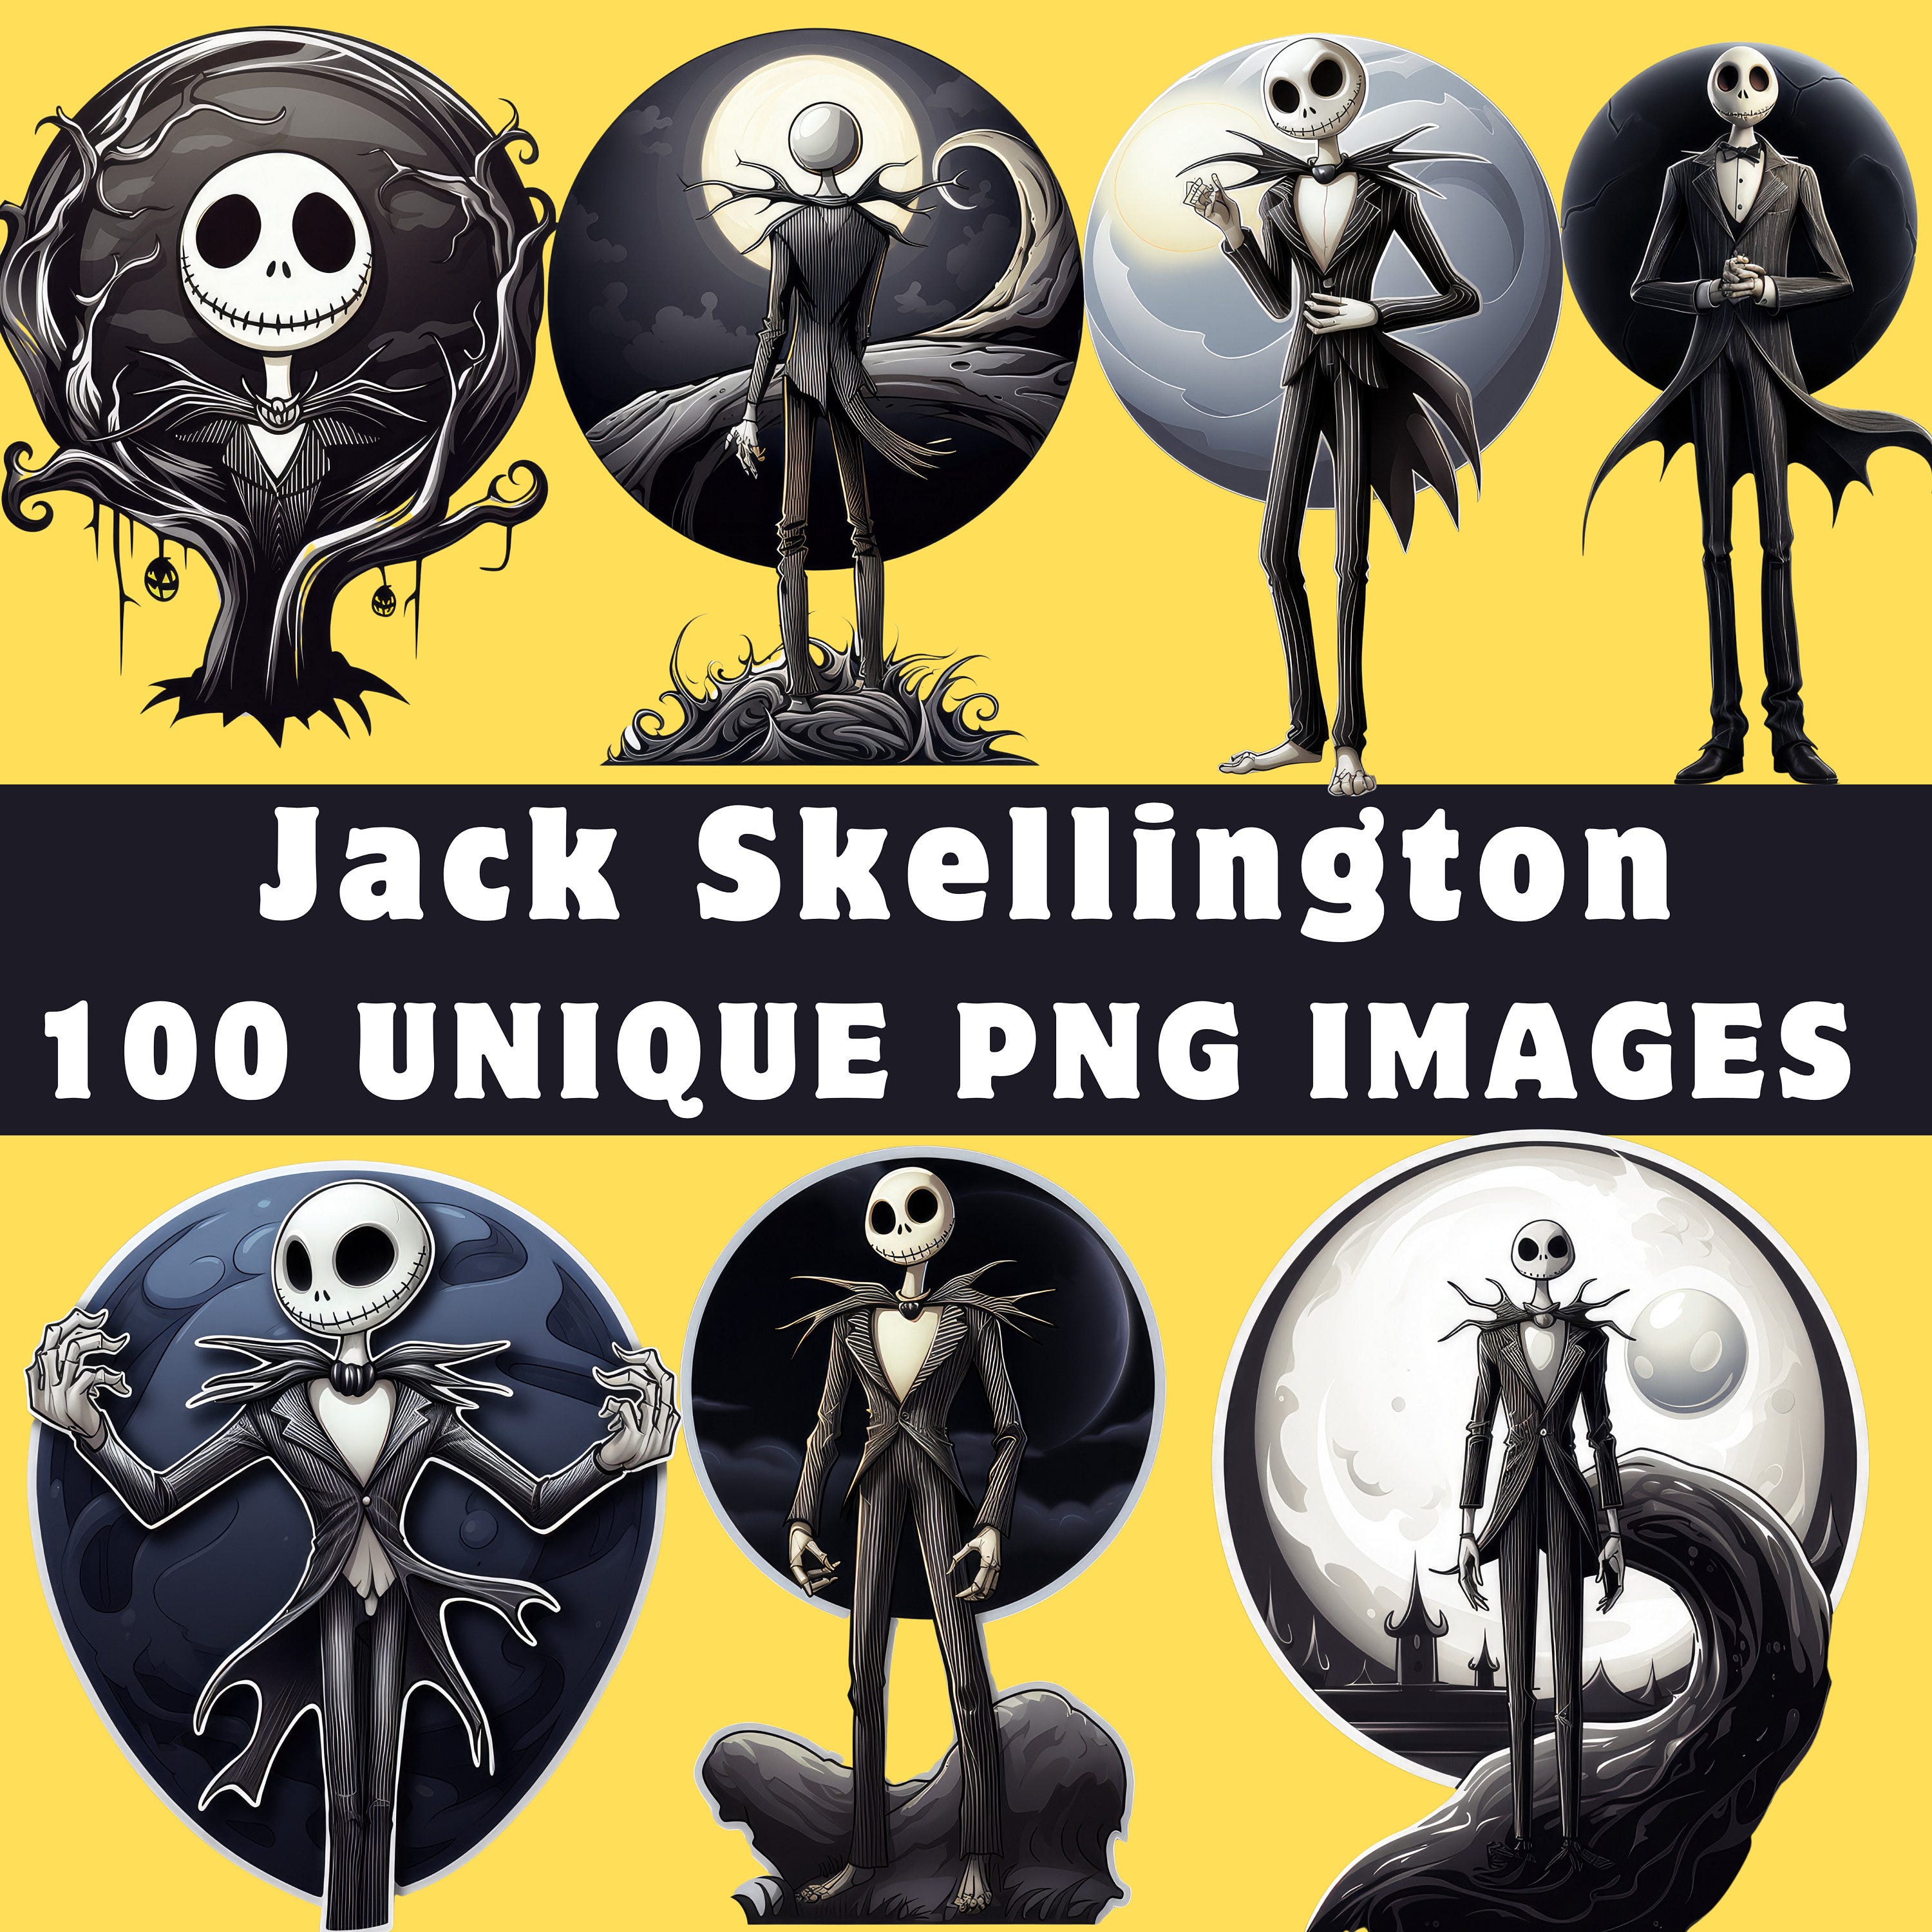 Jack Skellington 100+ Unique PNG, Nightmare Before Christmas PNG, Valentines Day, Christmas Movie Character Designs,Characters Halloween PNG